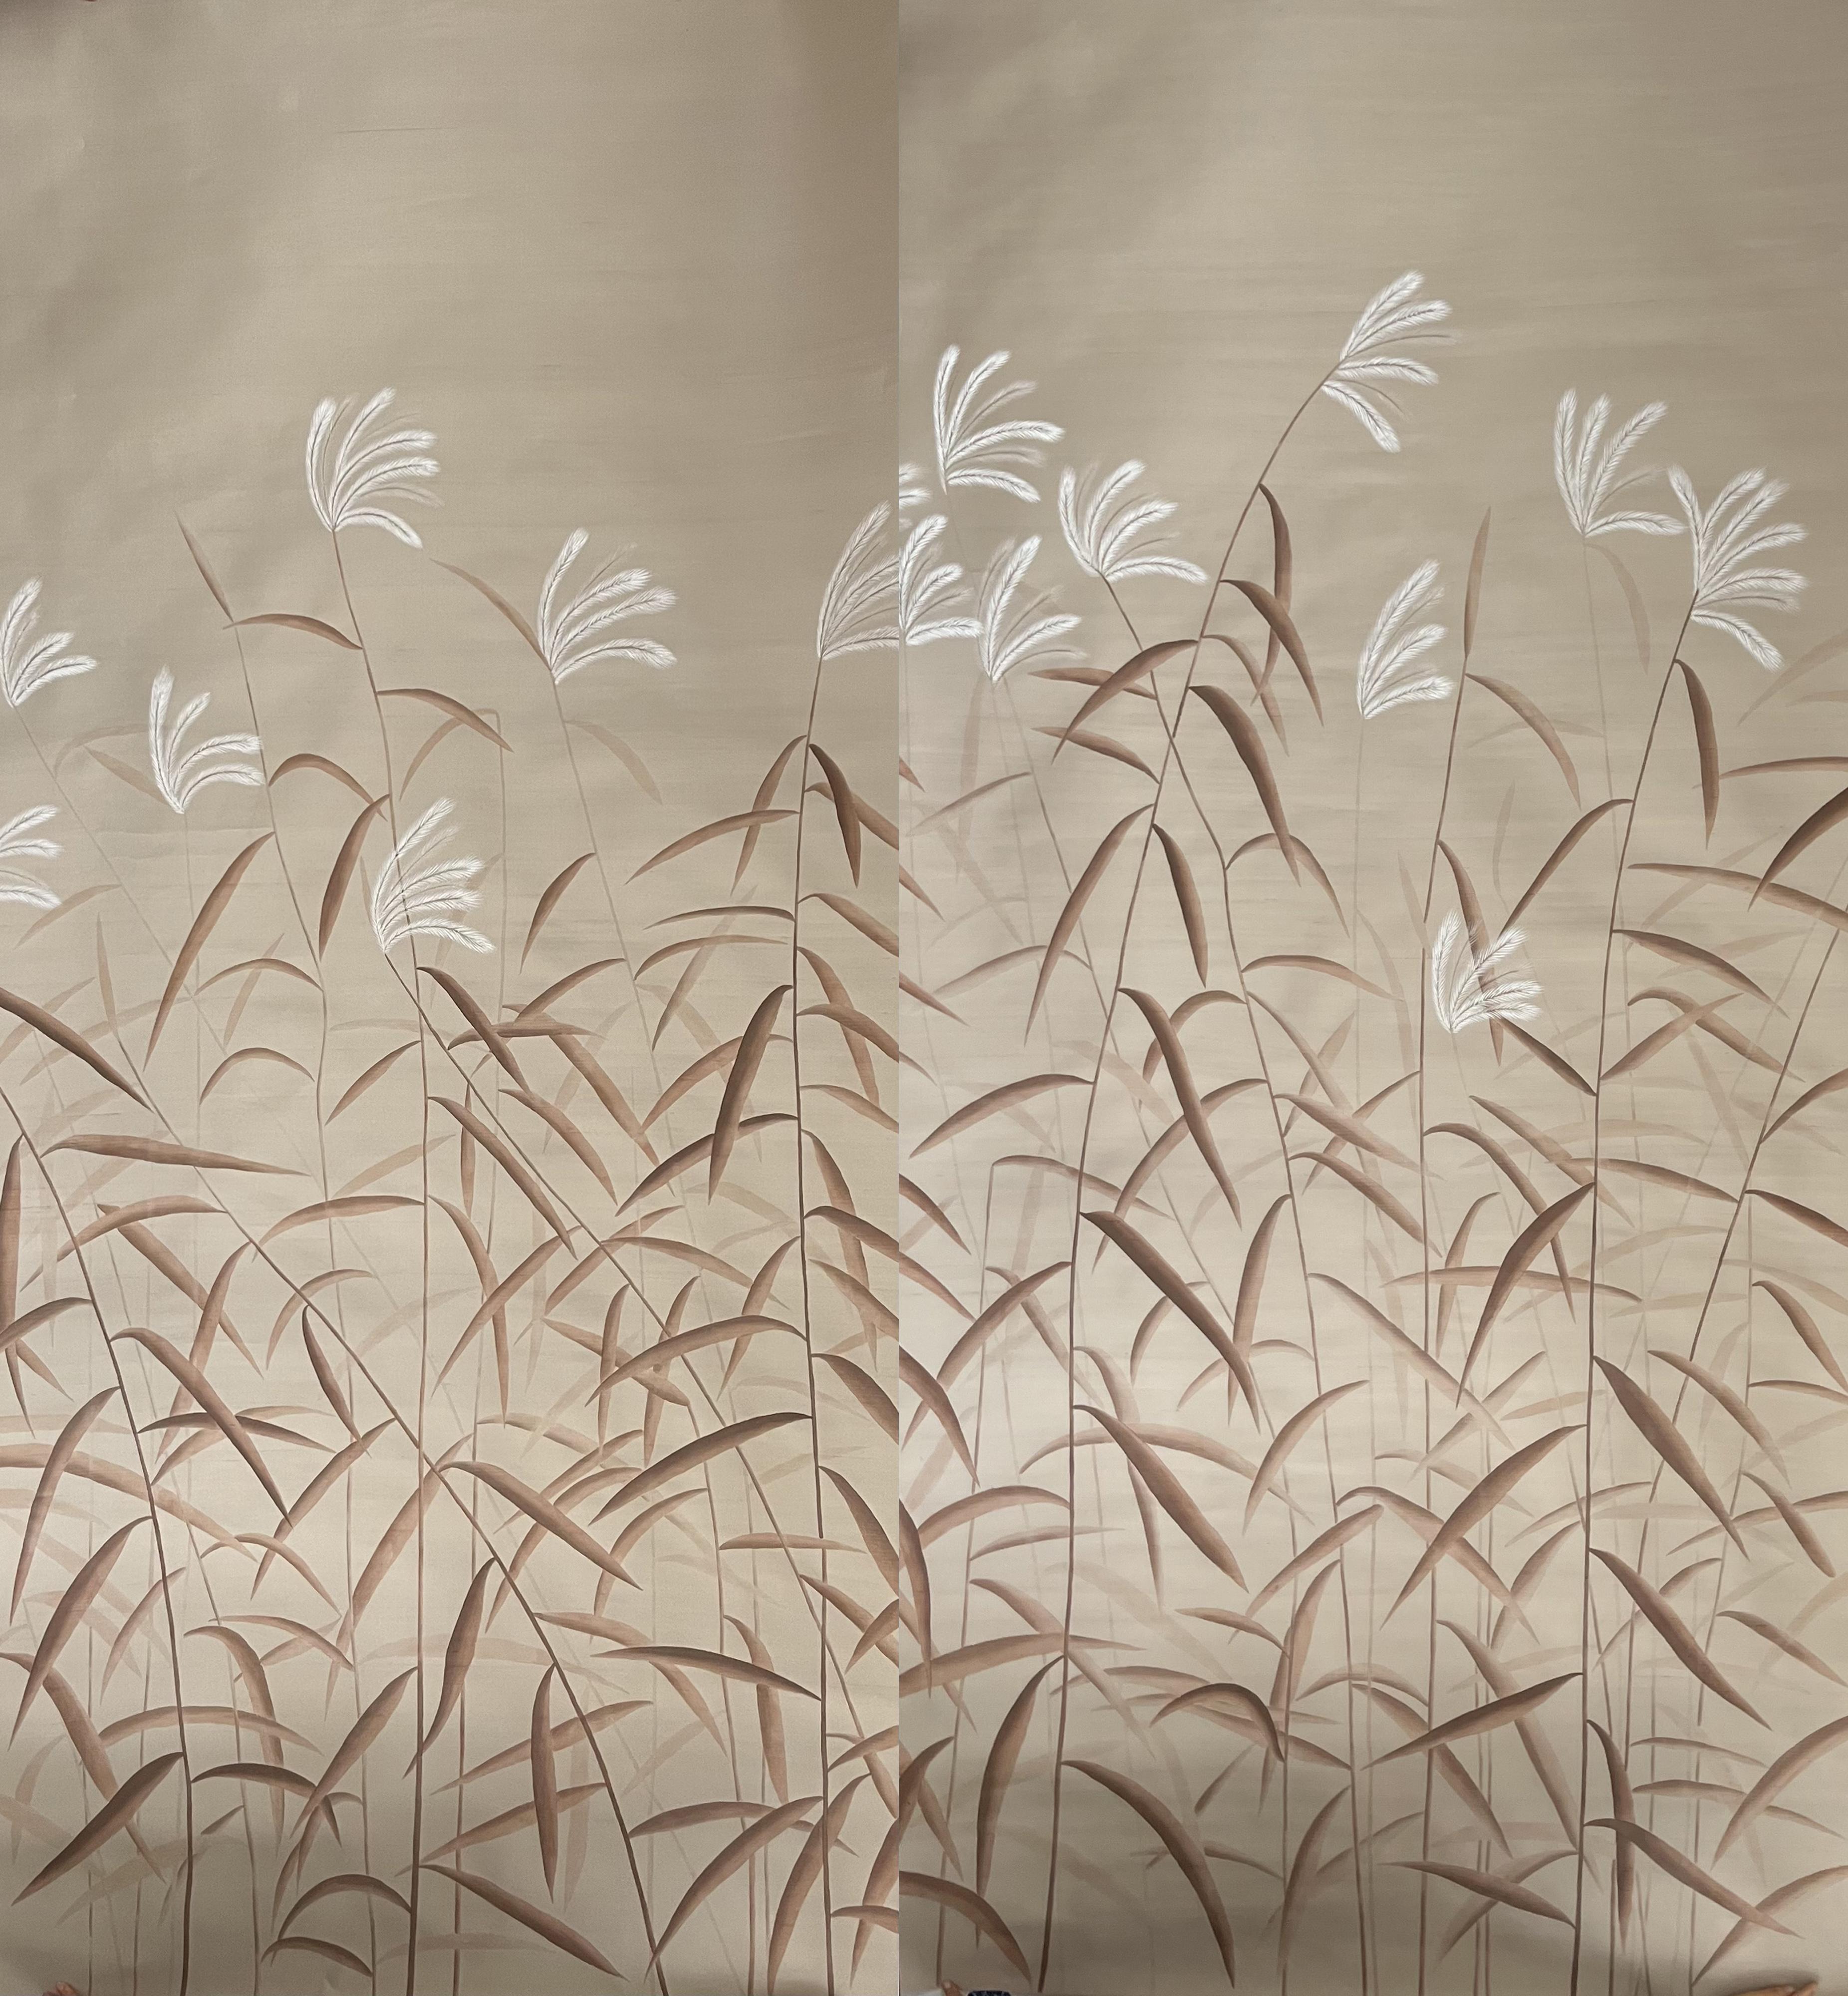 Hand-Painted Reeds Wallpaper Hand Painted Wallpaper on slub silk For Sale